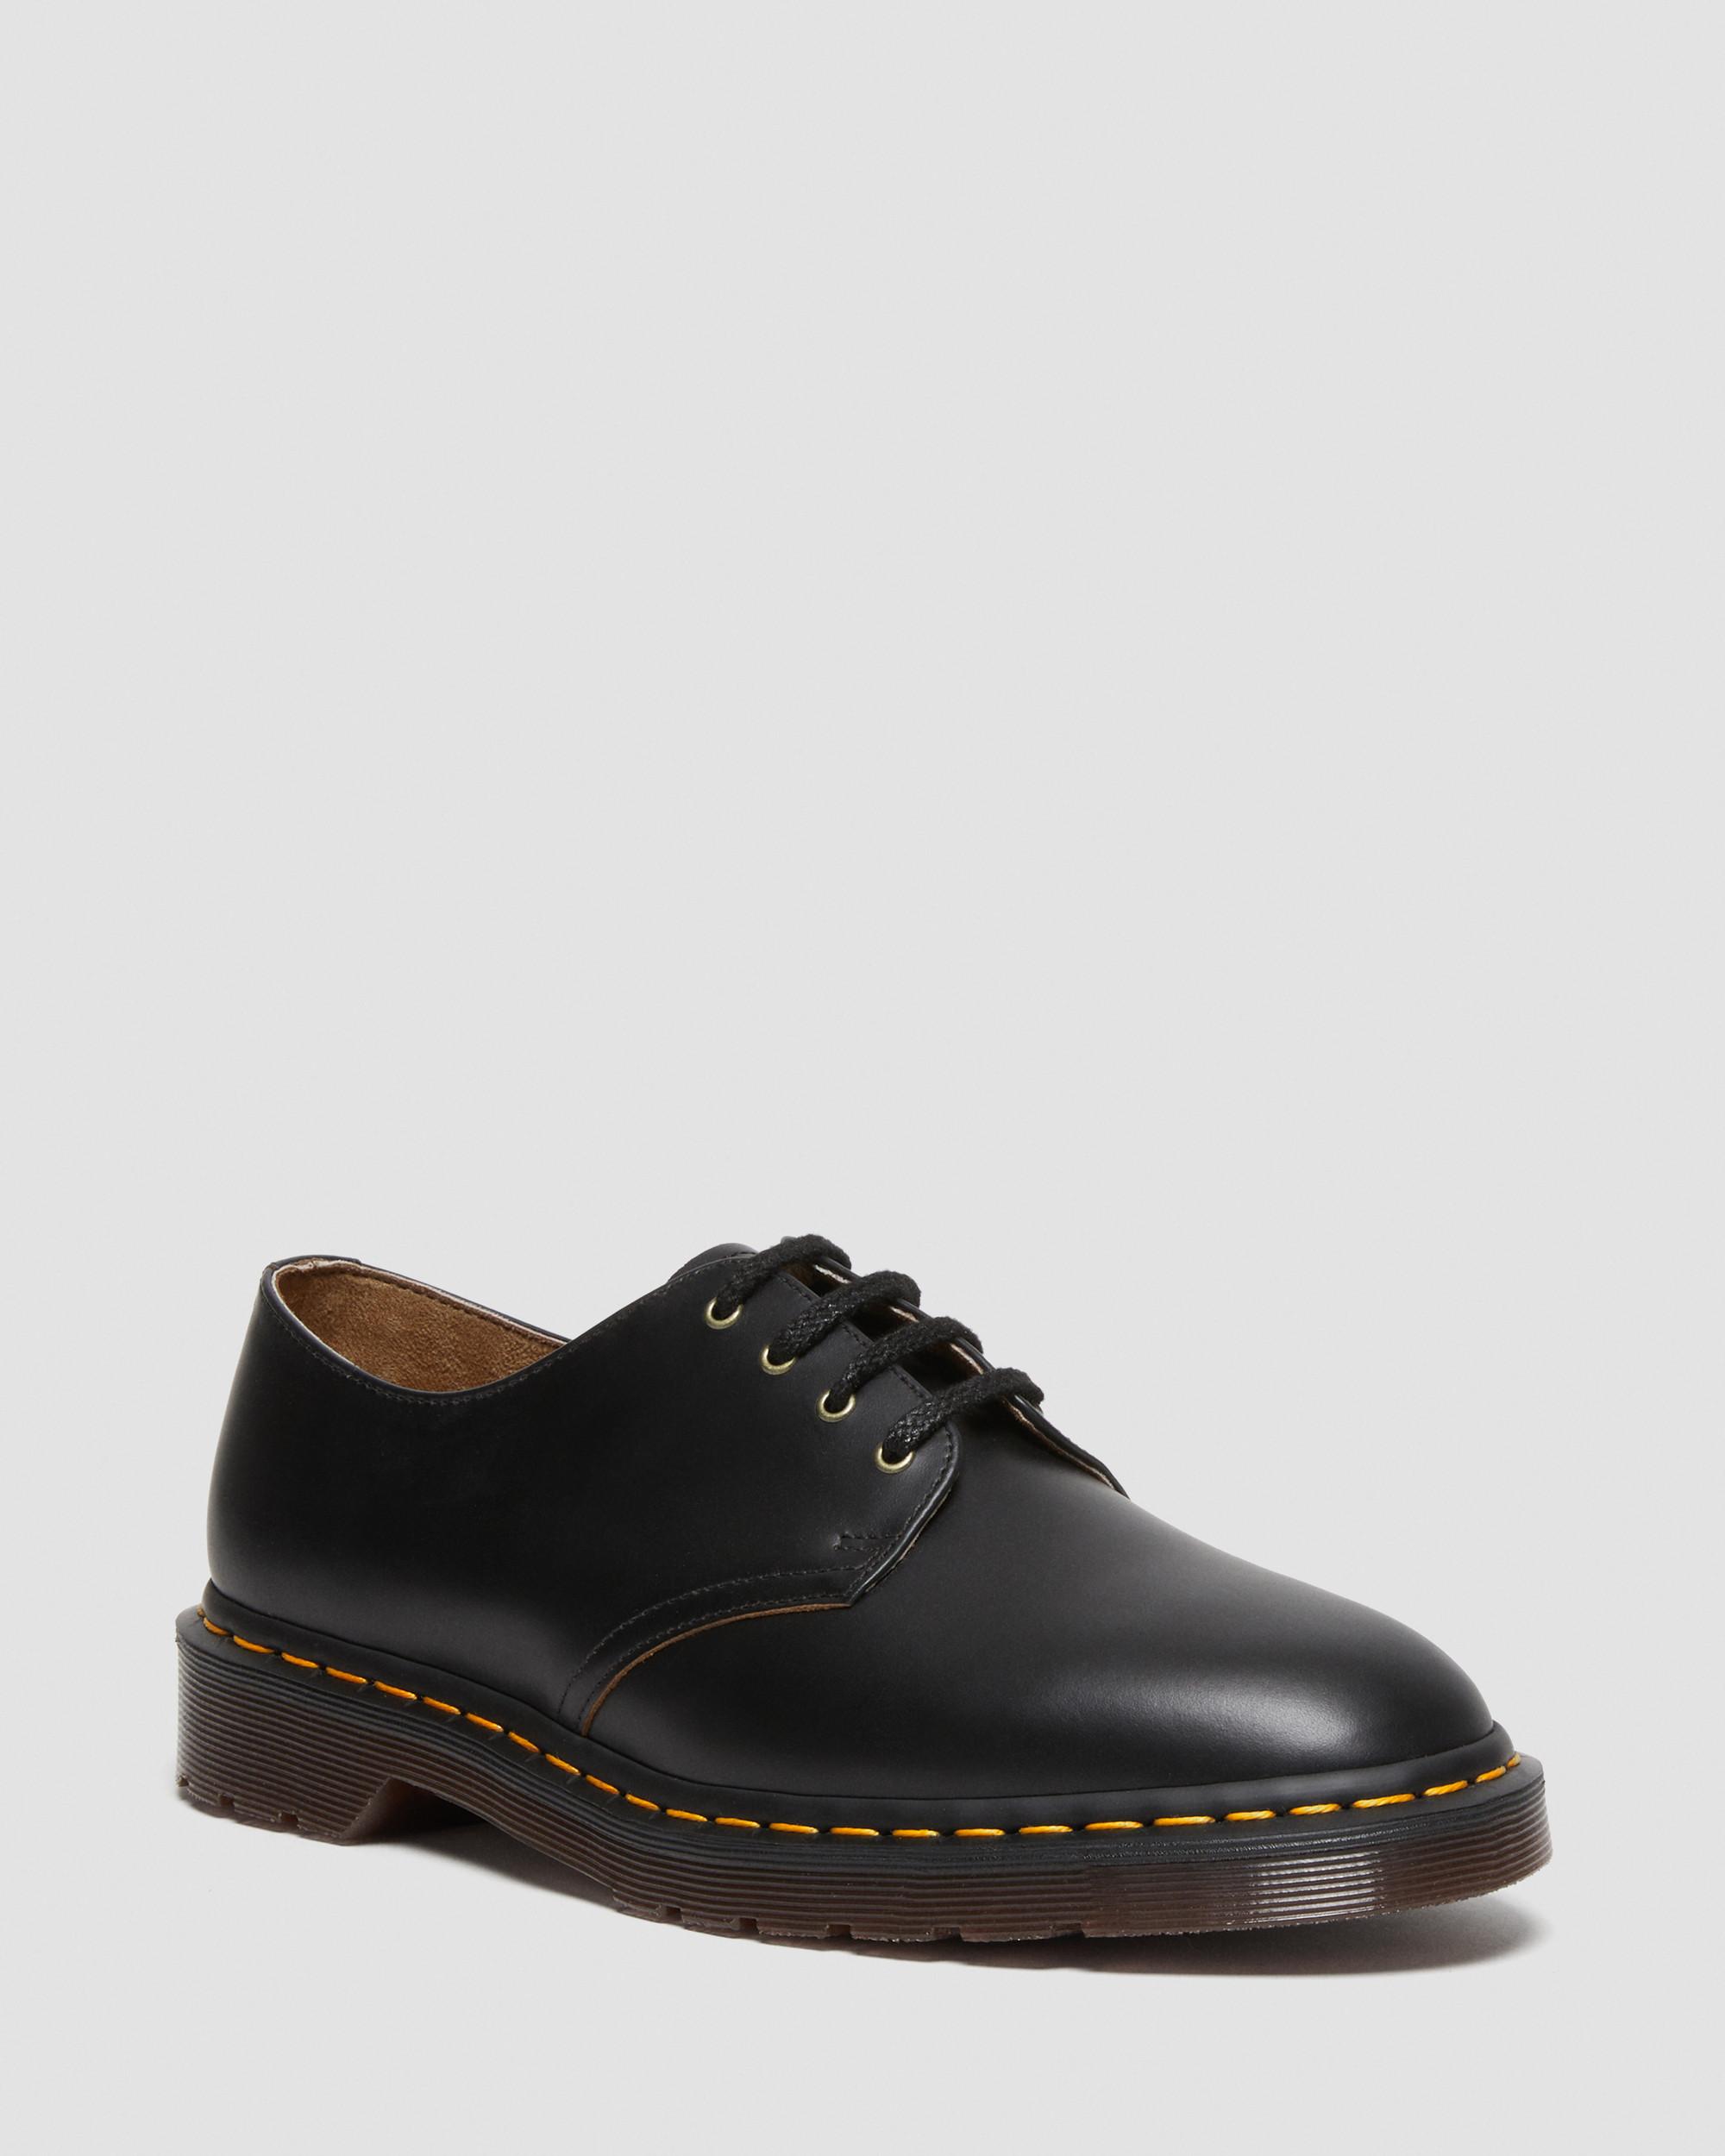 Smiths Vintage Smooth Leather Dress Shoes | Dr. Martens